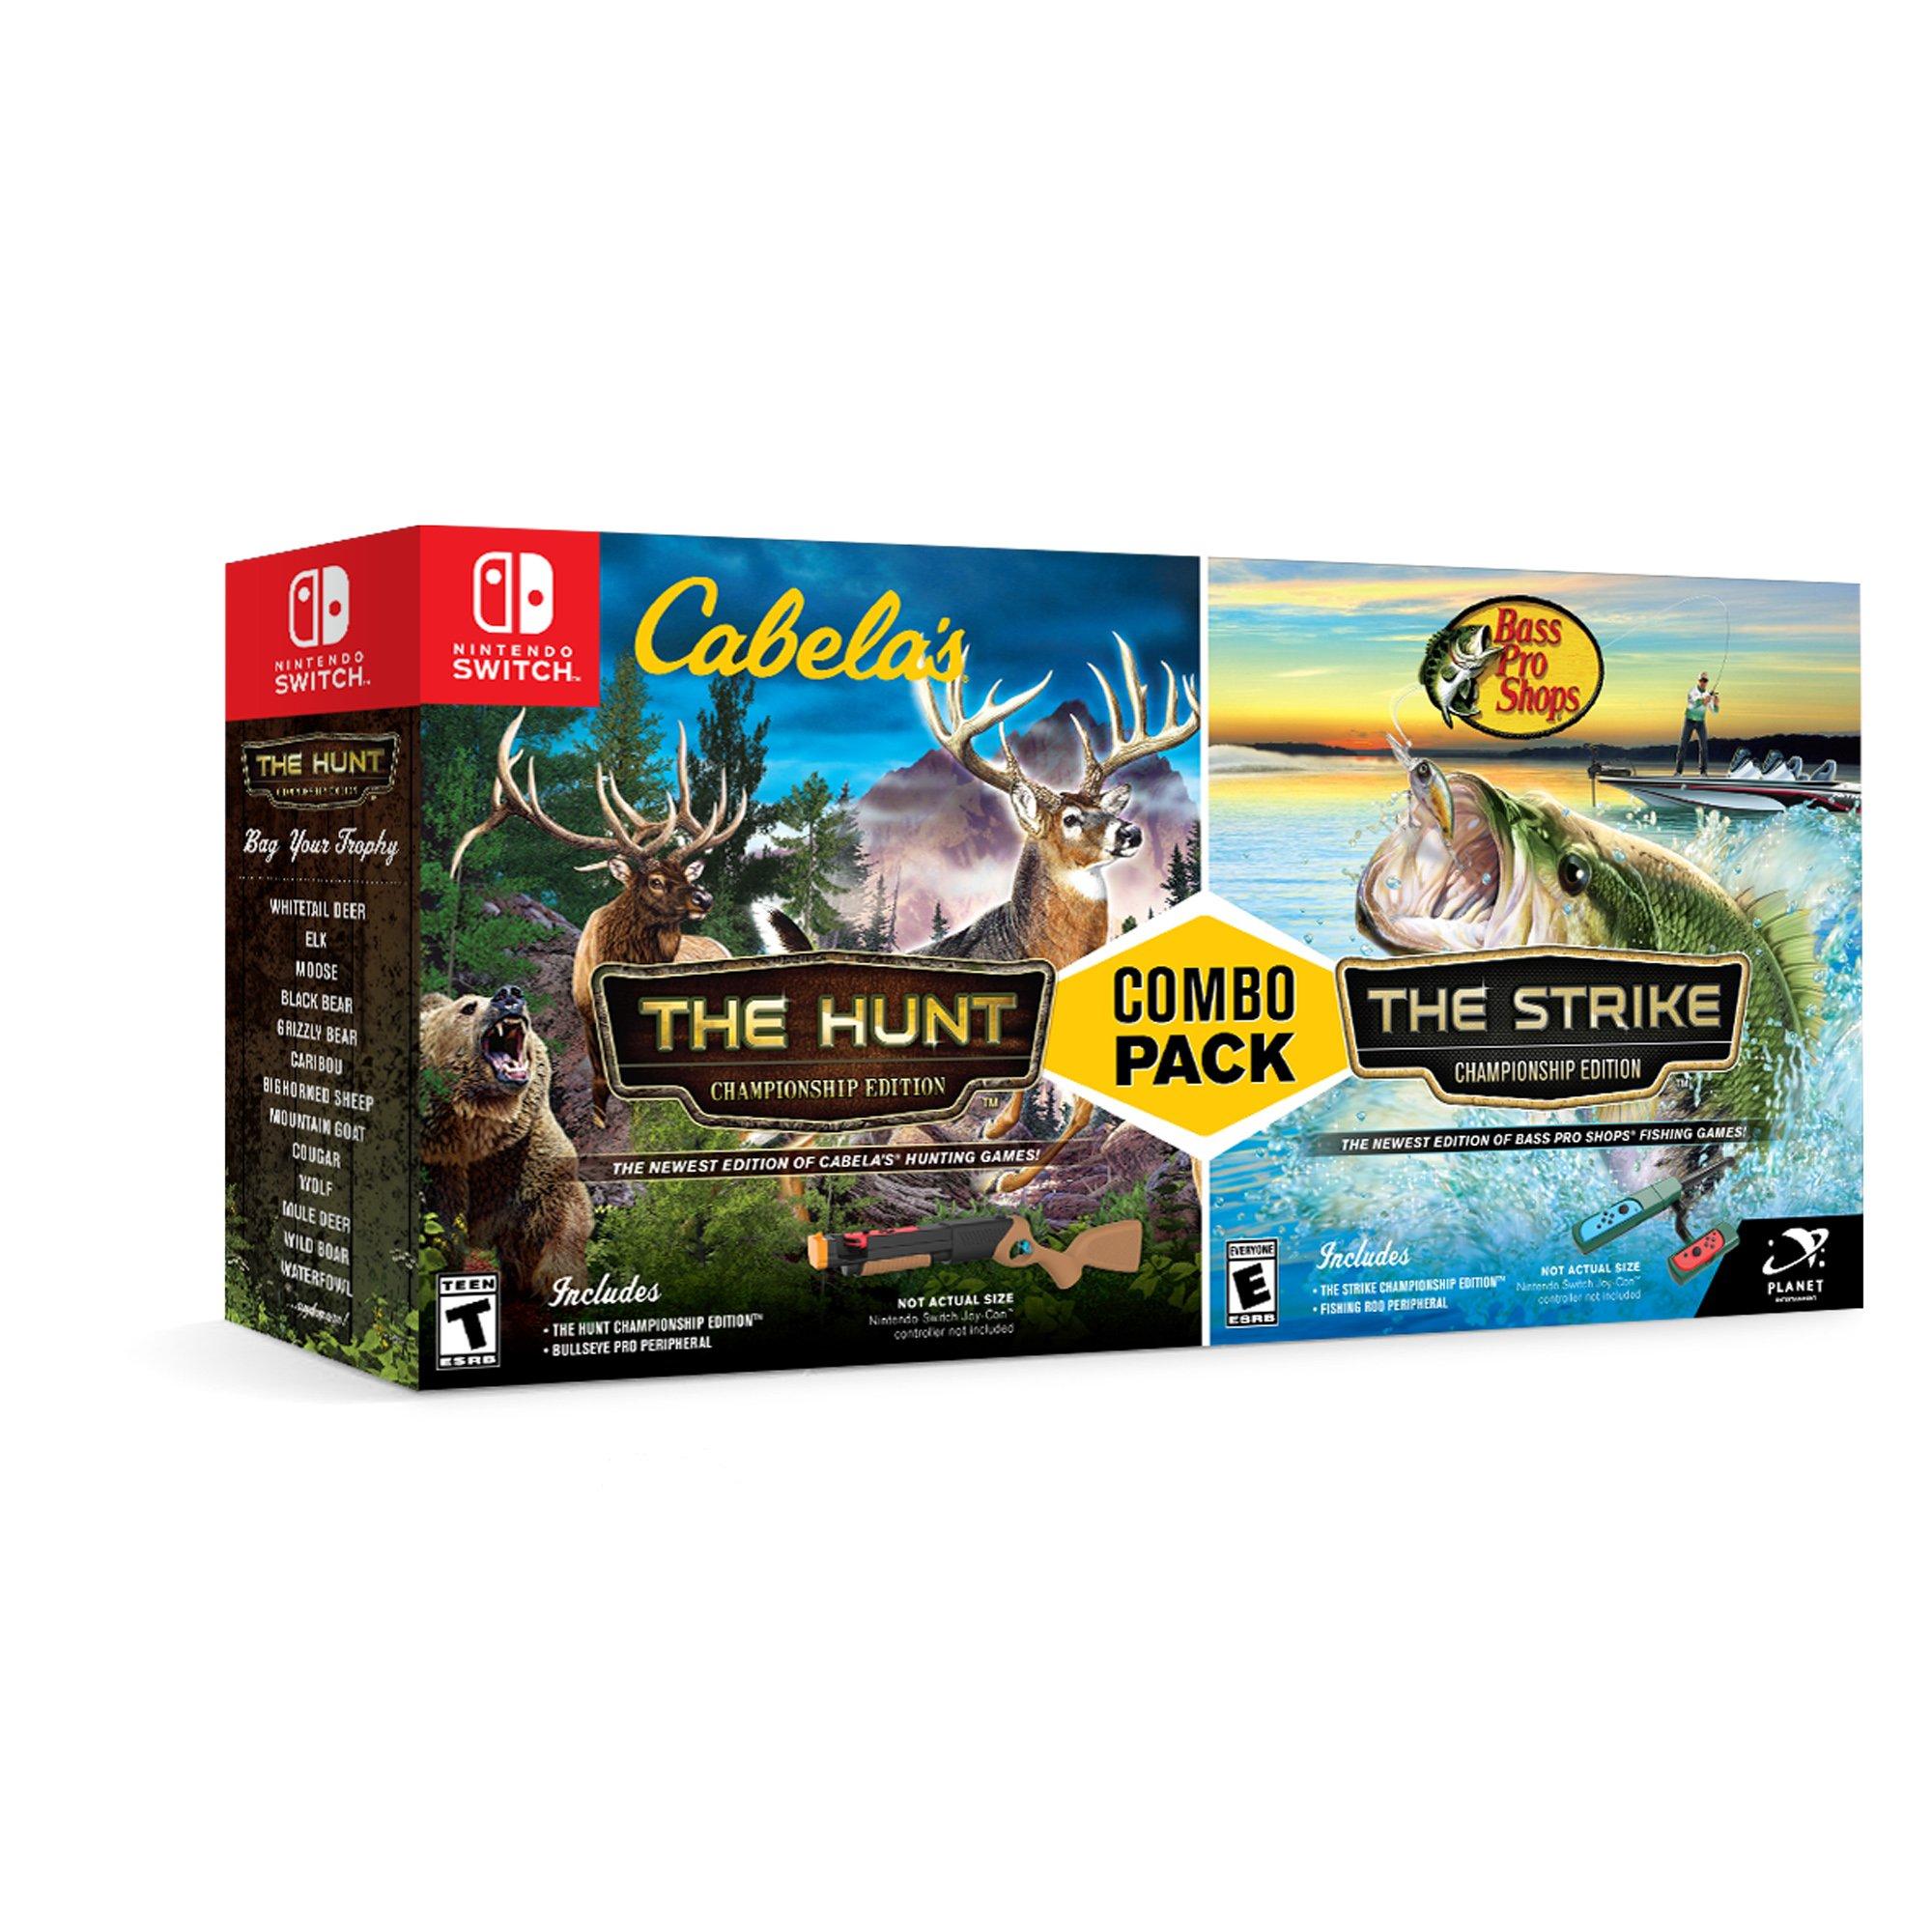 Cabela's The Hunt & Bass Pro Shops The Strike Combo Pack - Nintendo Switch